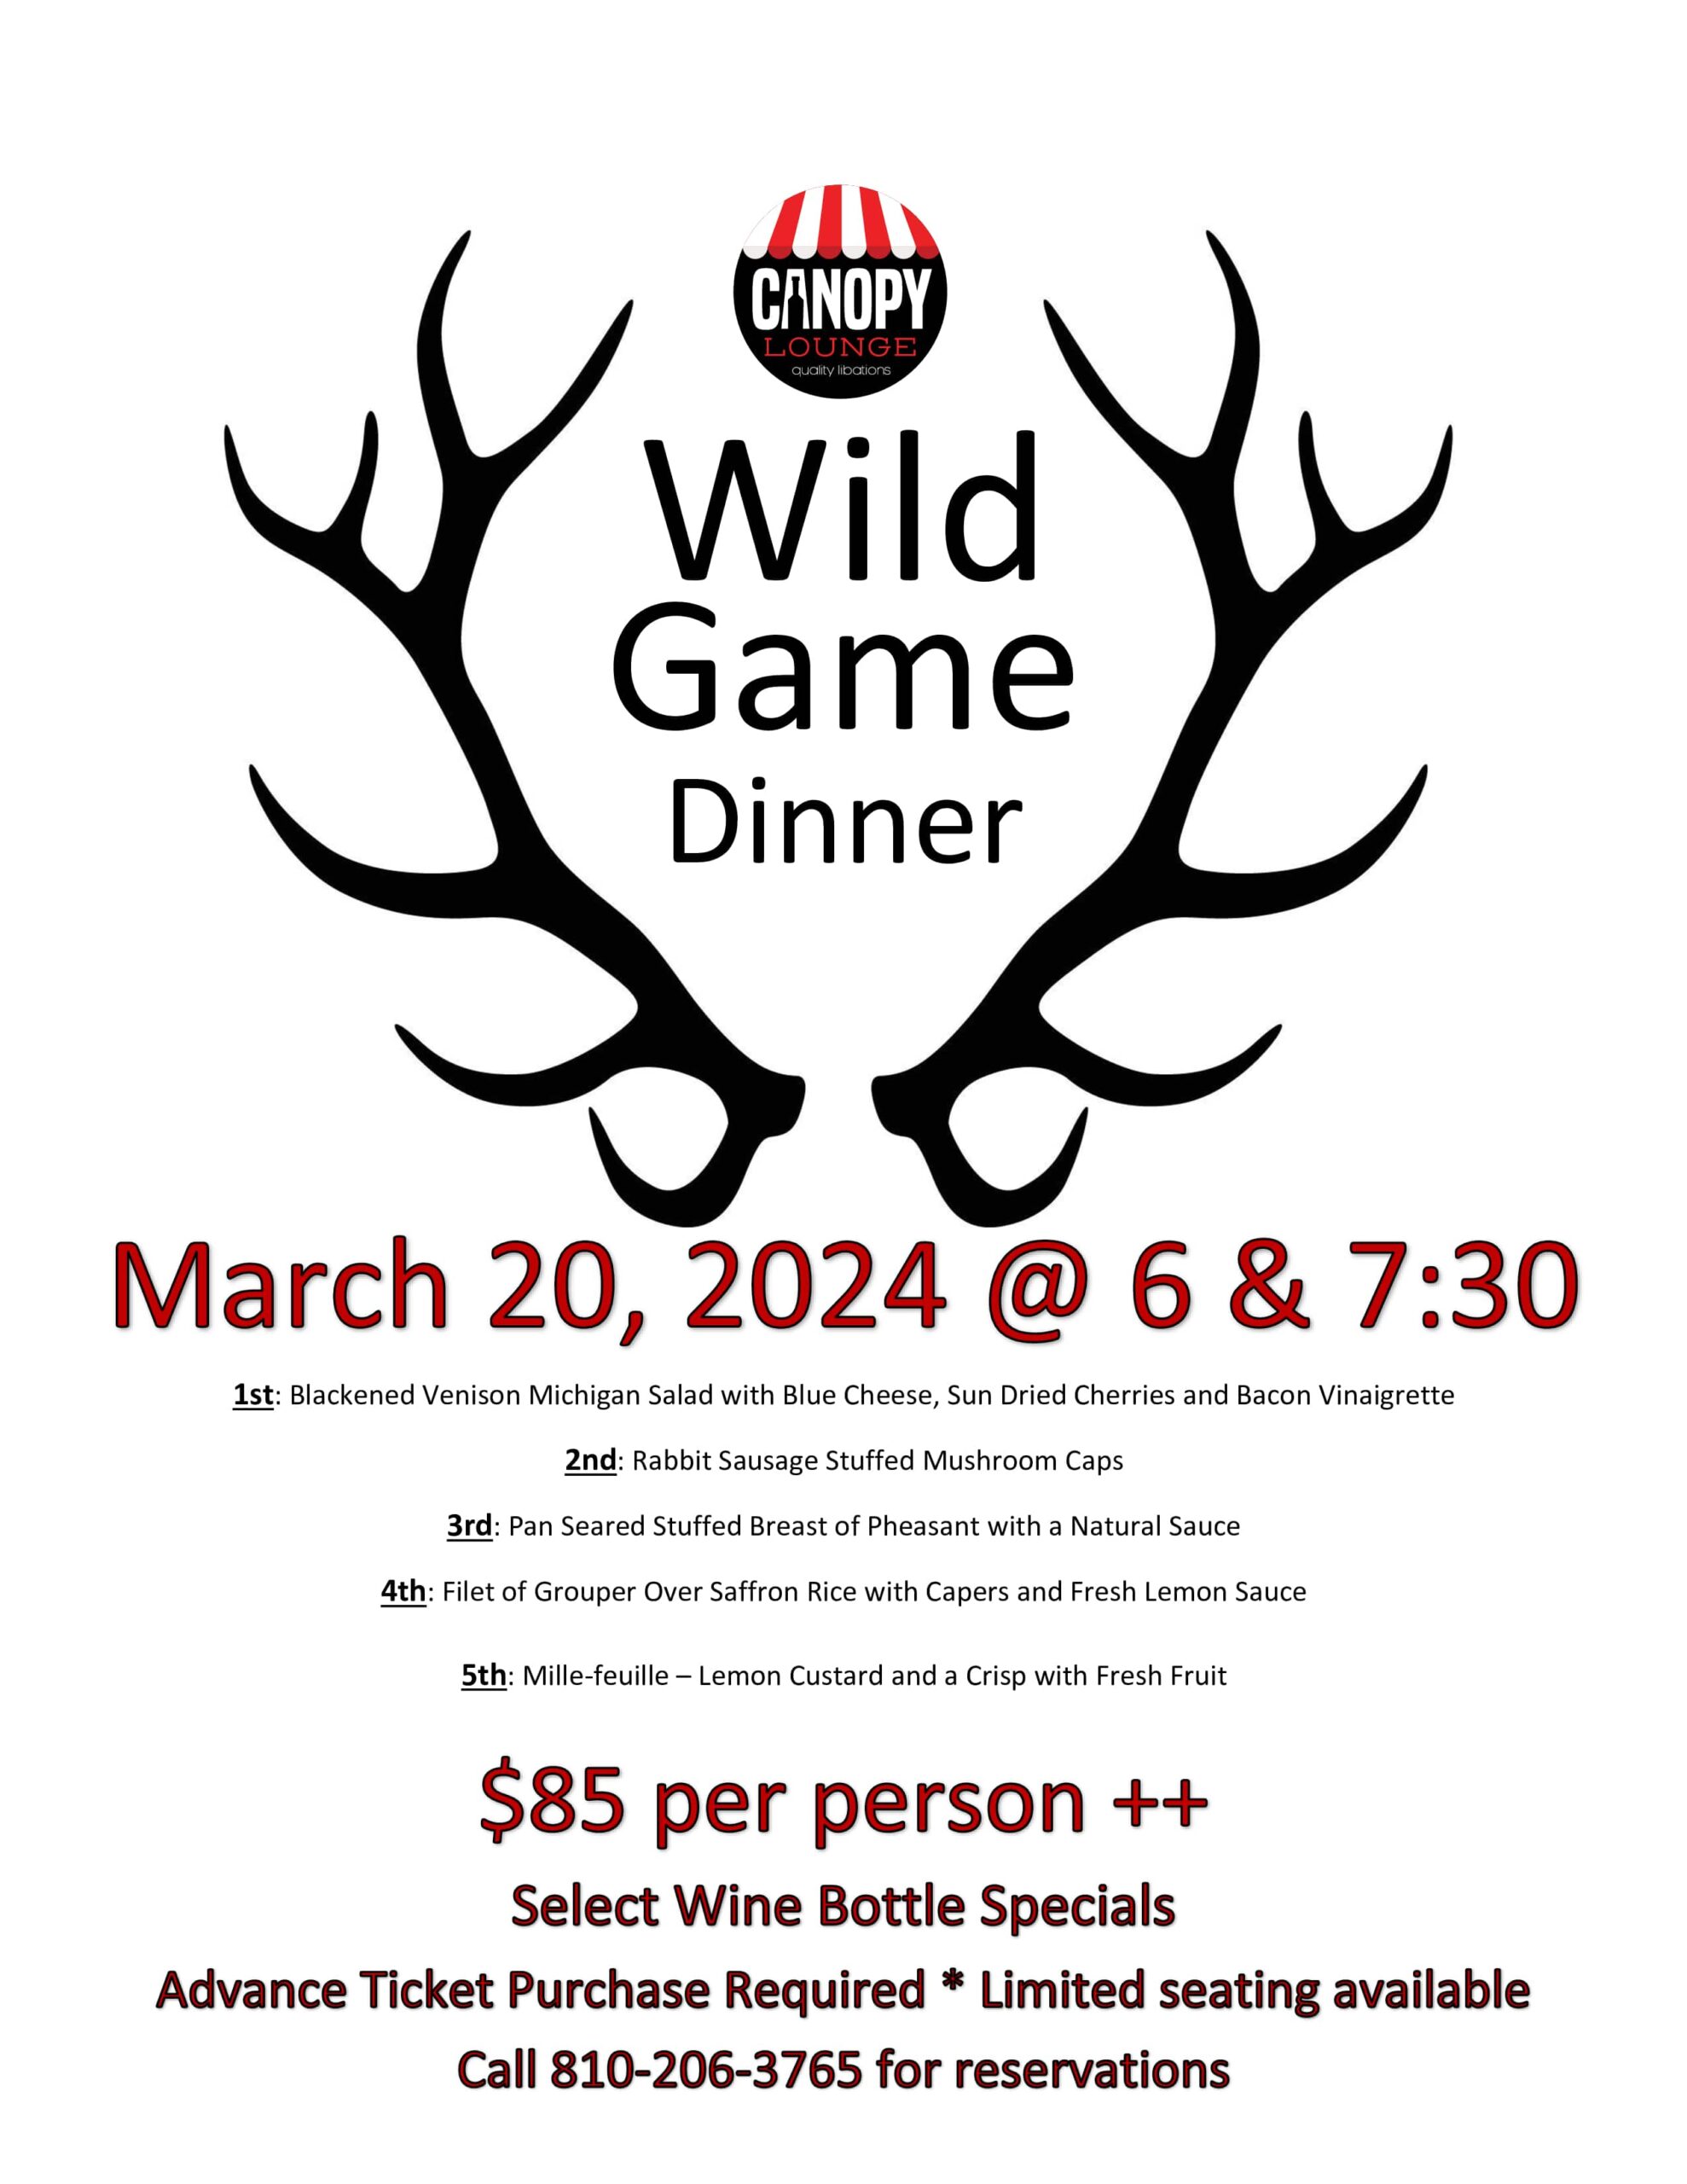 Wild Game Dinner. March 20, 2024 at 6 pm and 7:30pm.